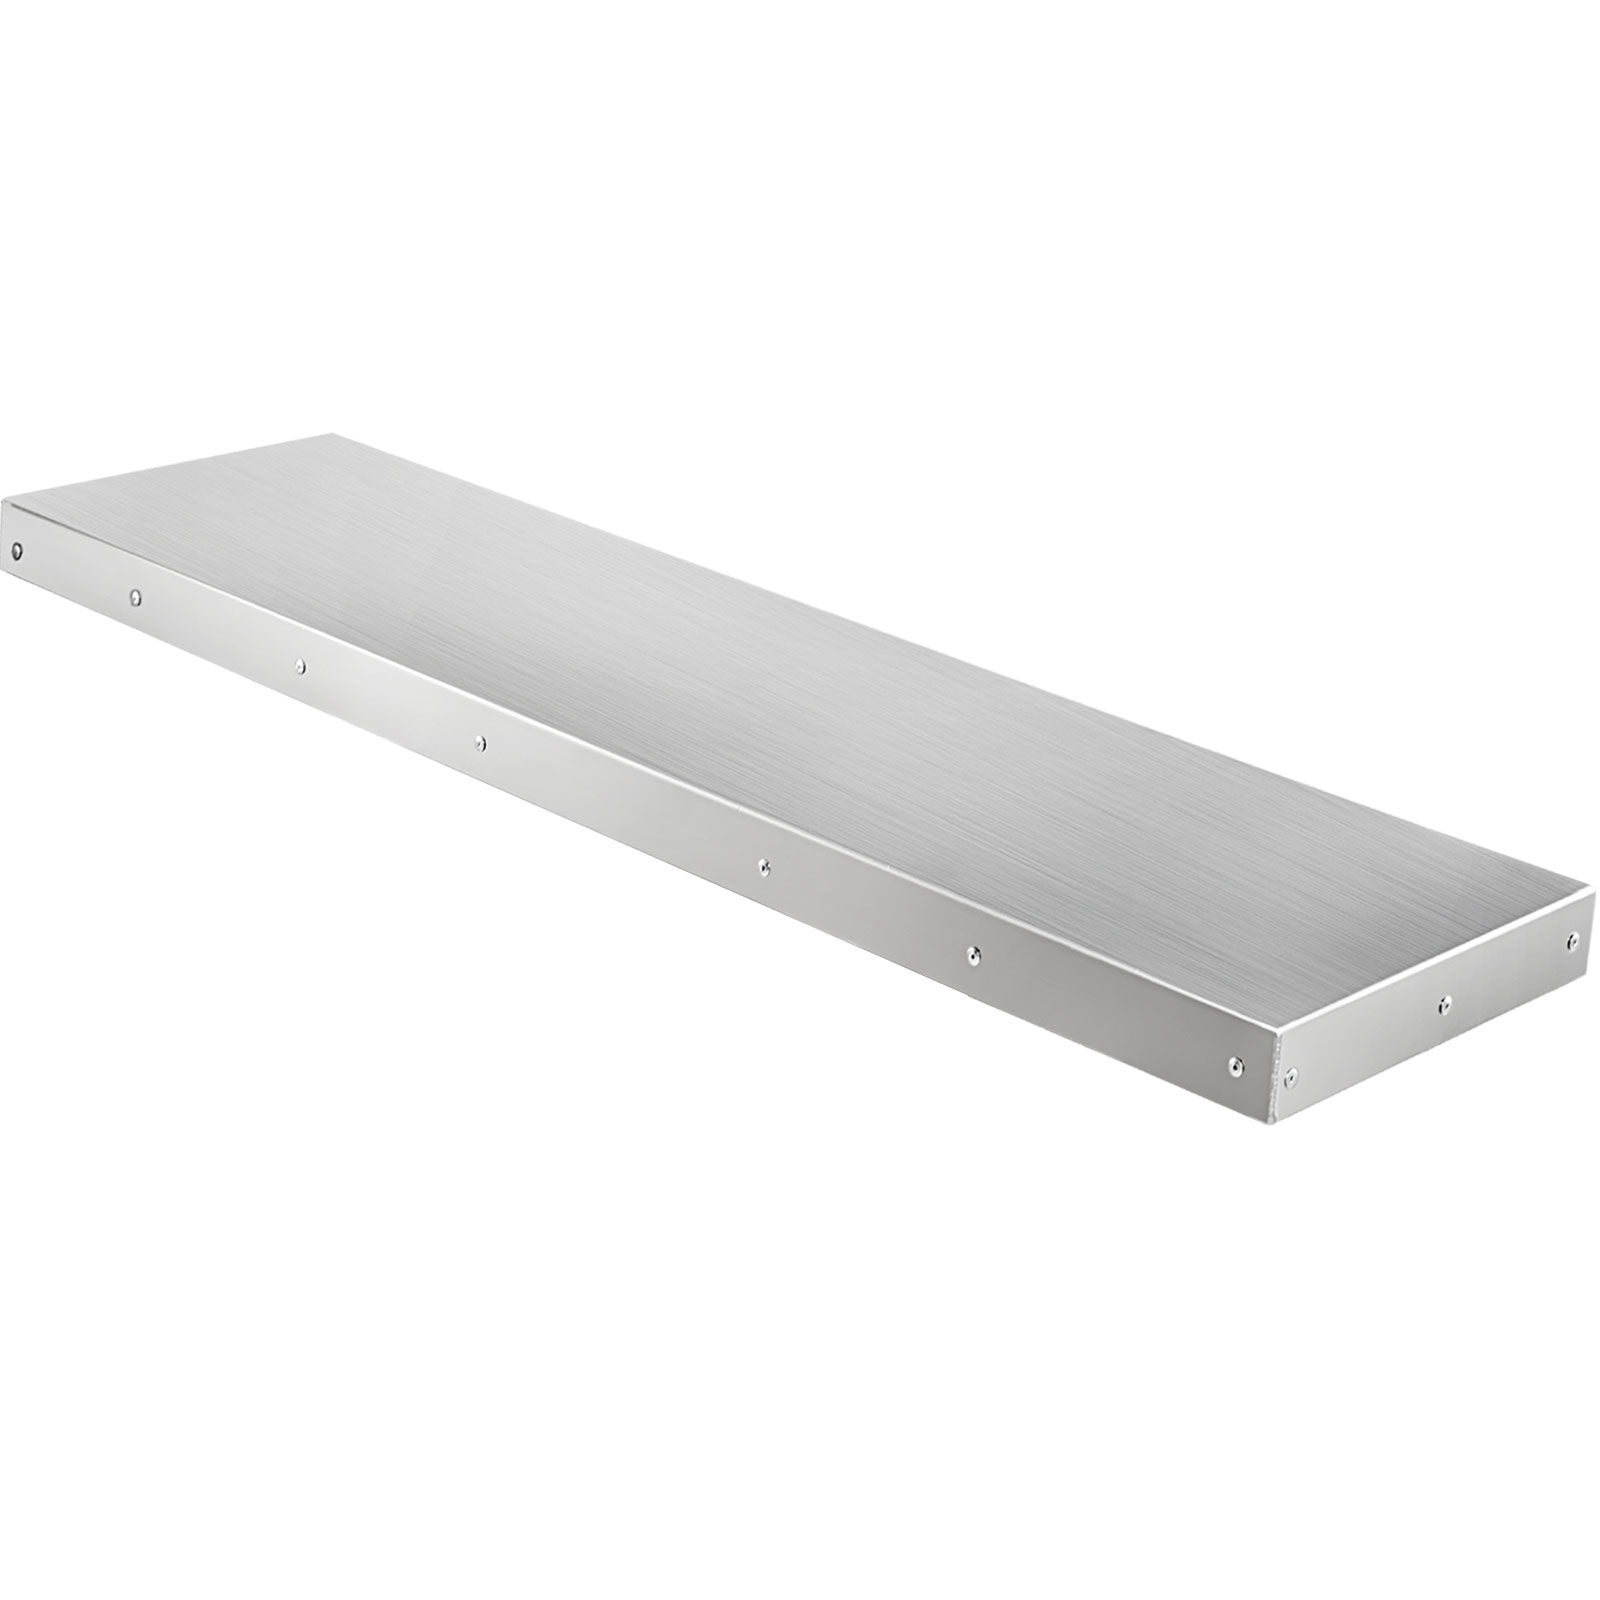 Concession Stand Shelf for Window 4 ft Free Shipping 